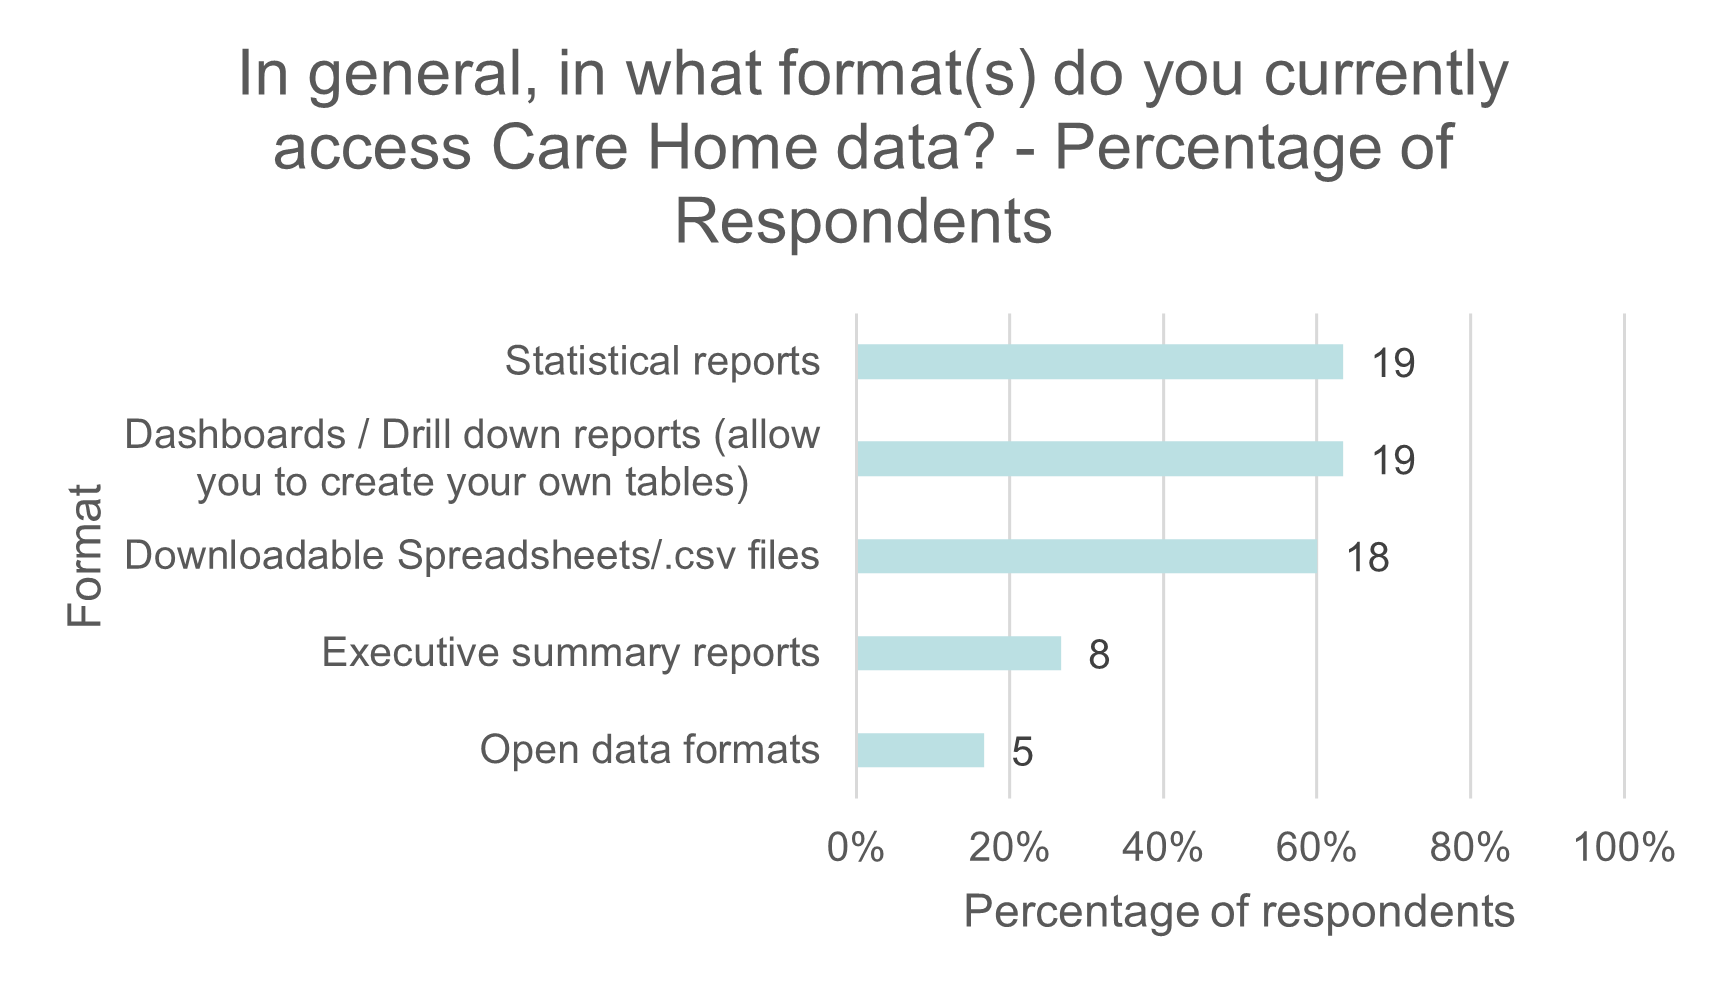 This chart shows the formats that respondents currently accessed data in. It shows the percentage of respondents and the raw number of responses next to each row. The results are as follows: Statistical reports 19, Dashboard / Drill down reports 19, Downloadable Spreadsheets 18, Executive summary reports 8, Open data formats 5.